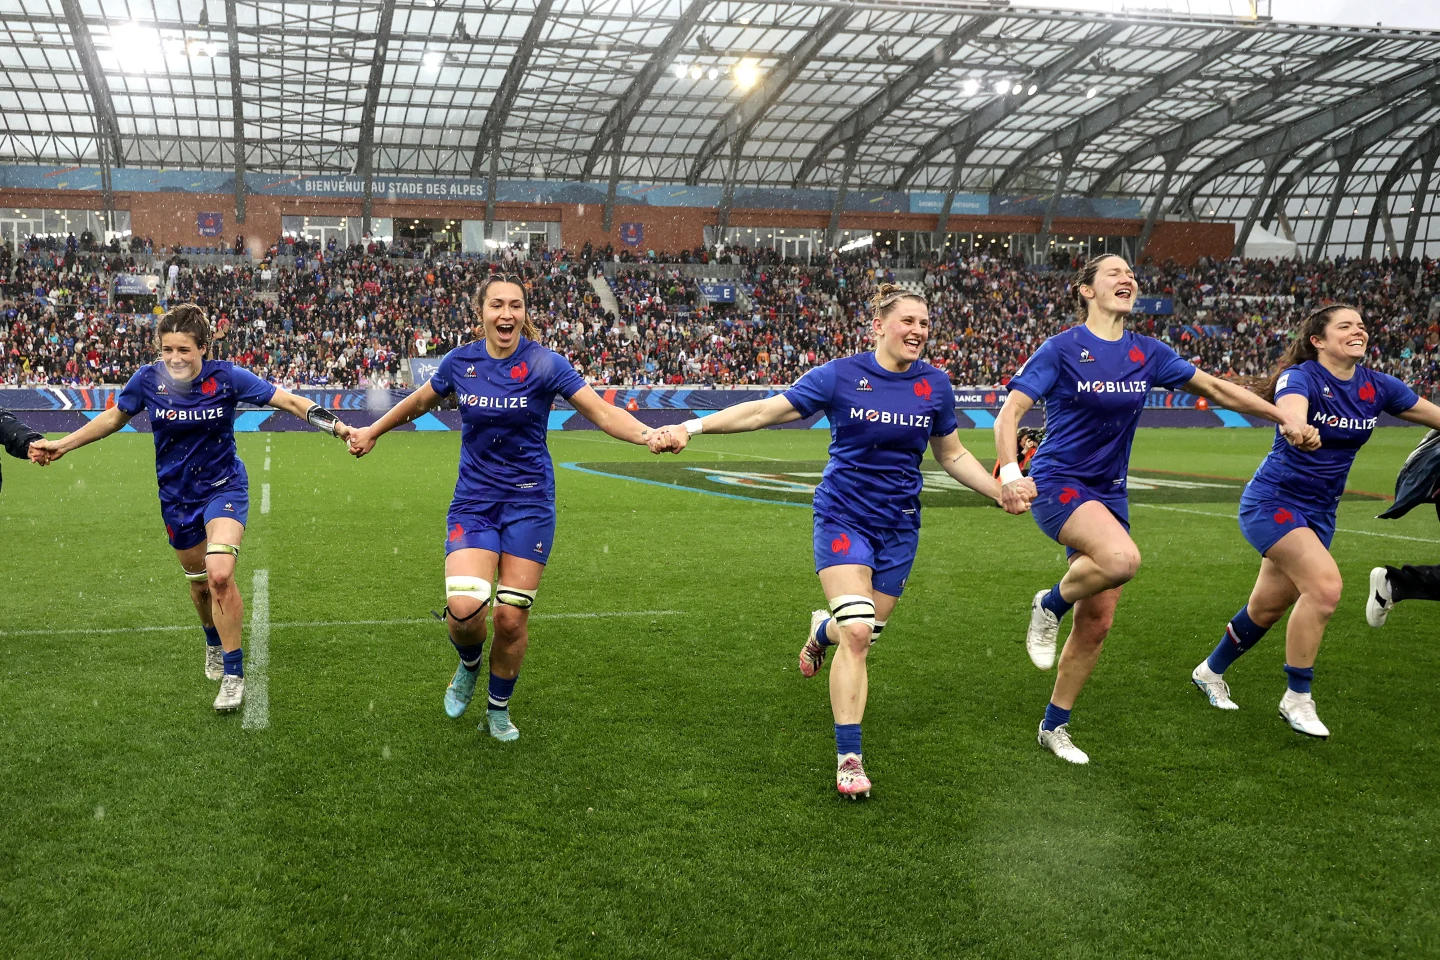 6 Nations to intro new innovations